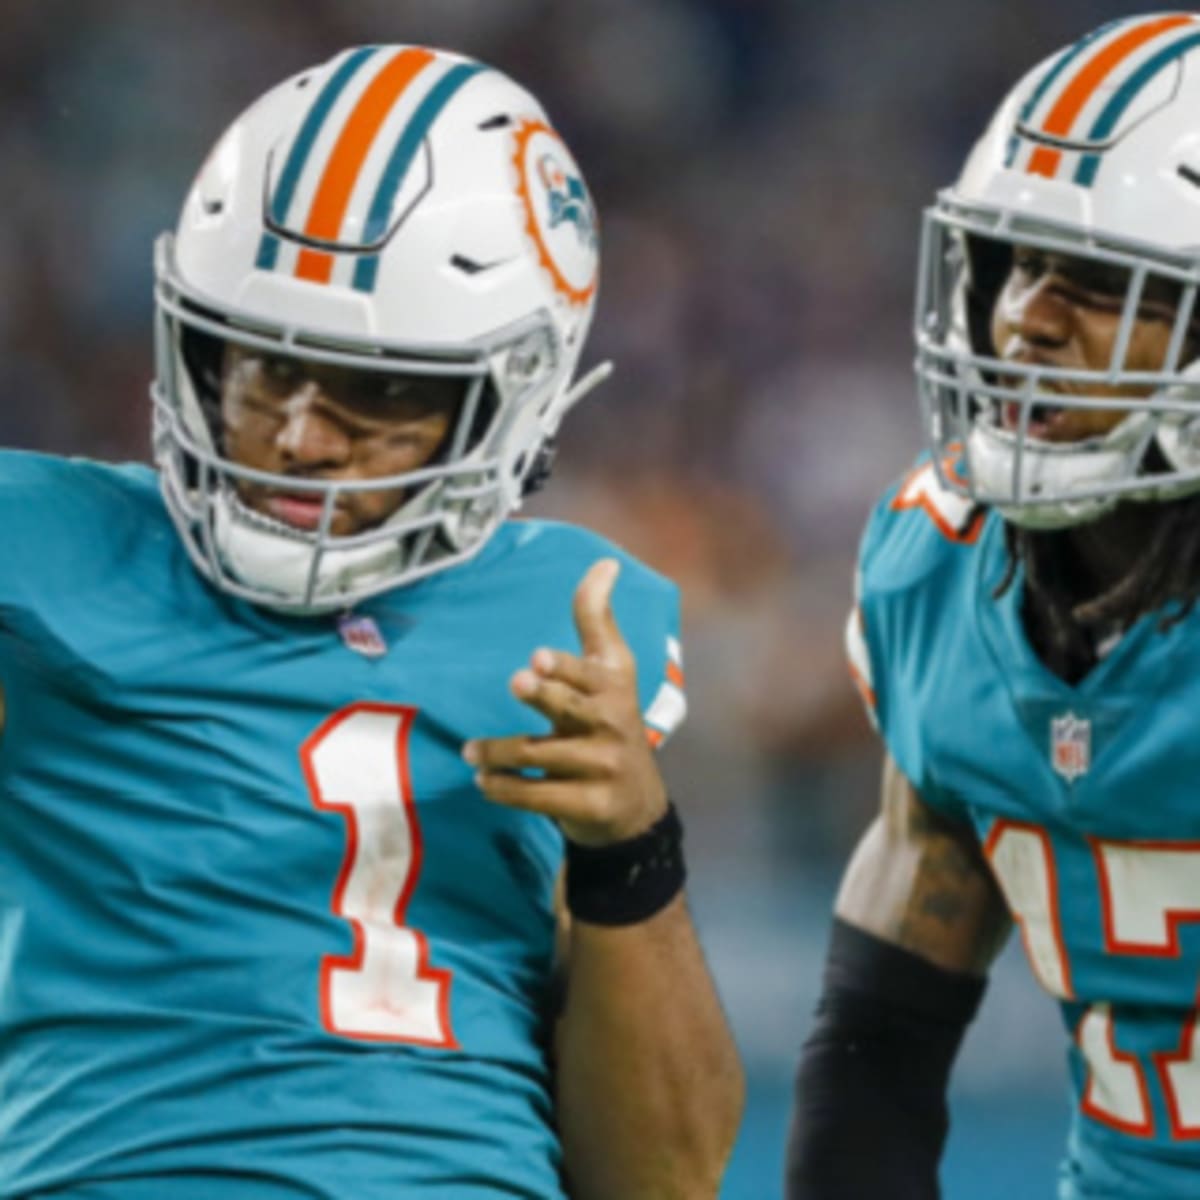 Miami Dolphins schedule for 2022 NFL season - College Football HQ